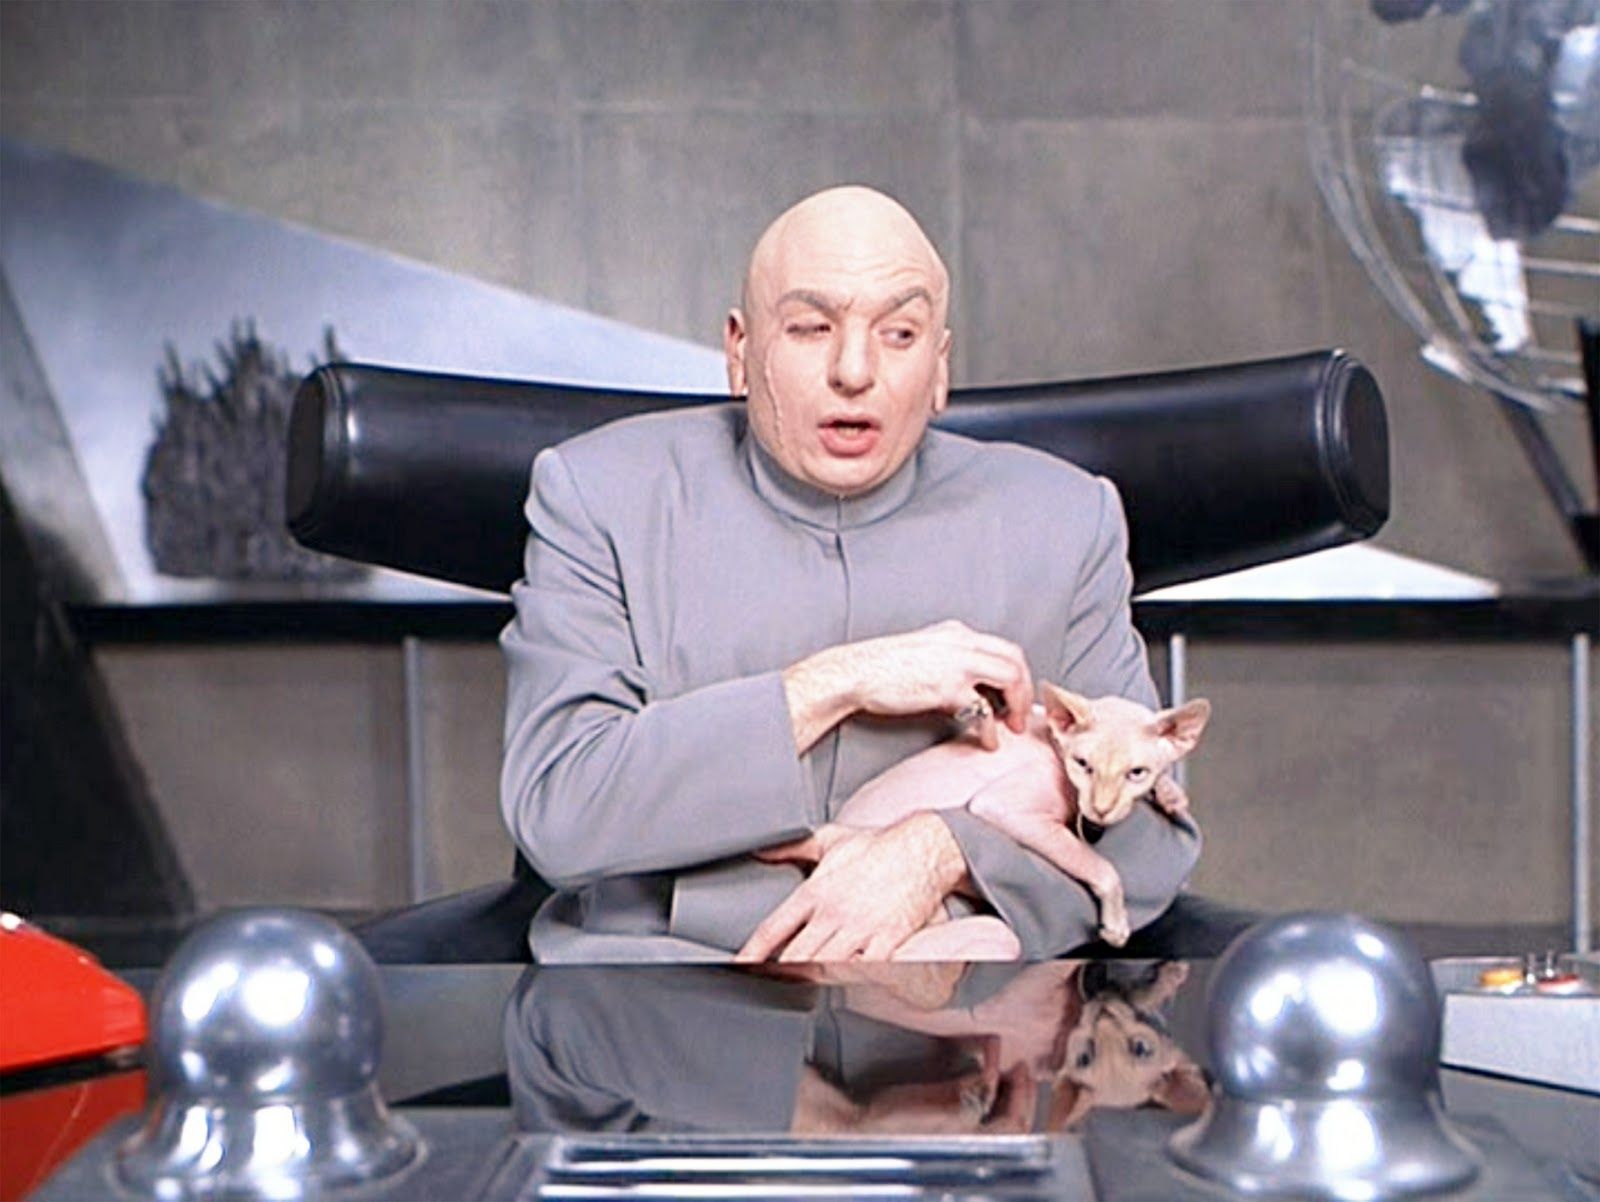 Dr.evil talking while touching bigglesworth gently